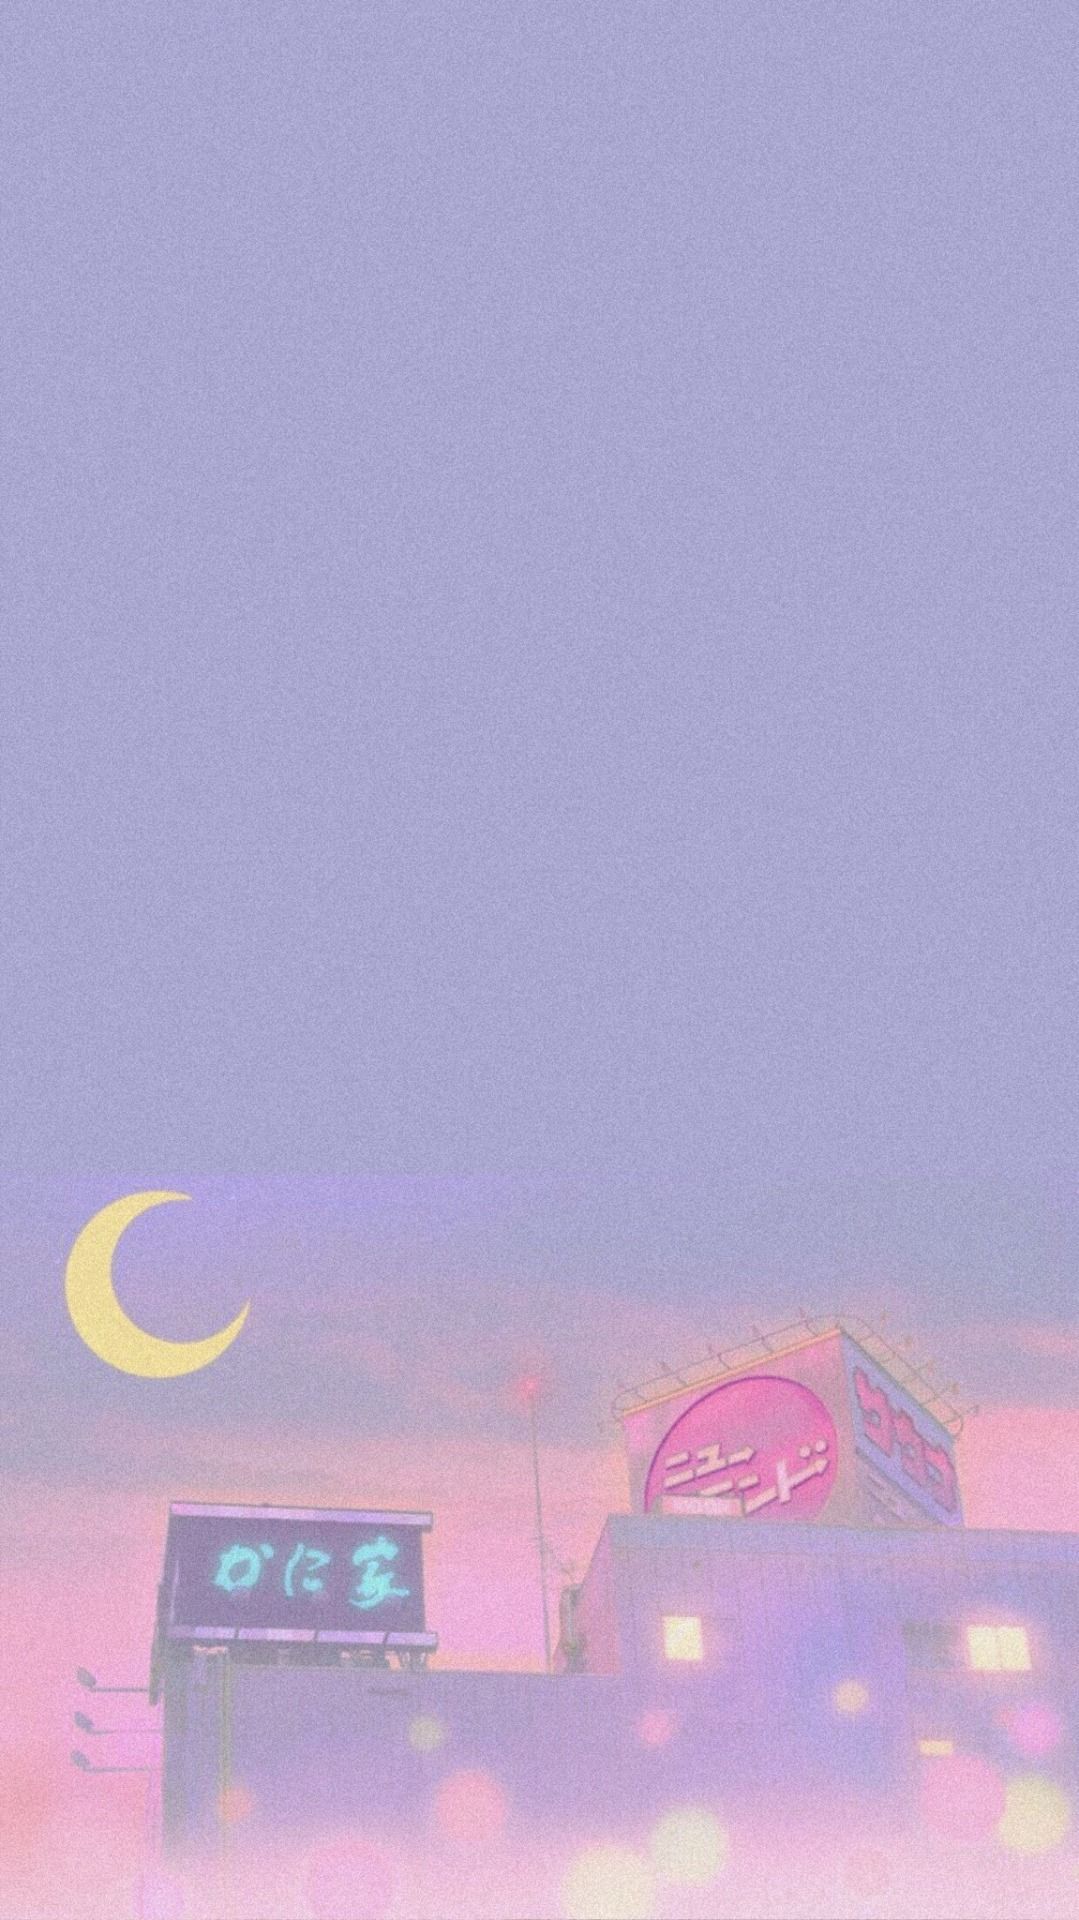 Aesthetic phone wallpaper of a pink and purple sunset with a neon sign in the background - 90s anime